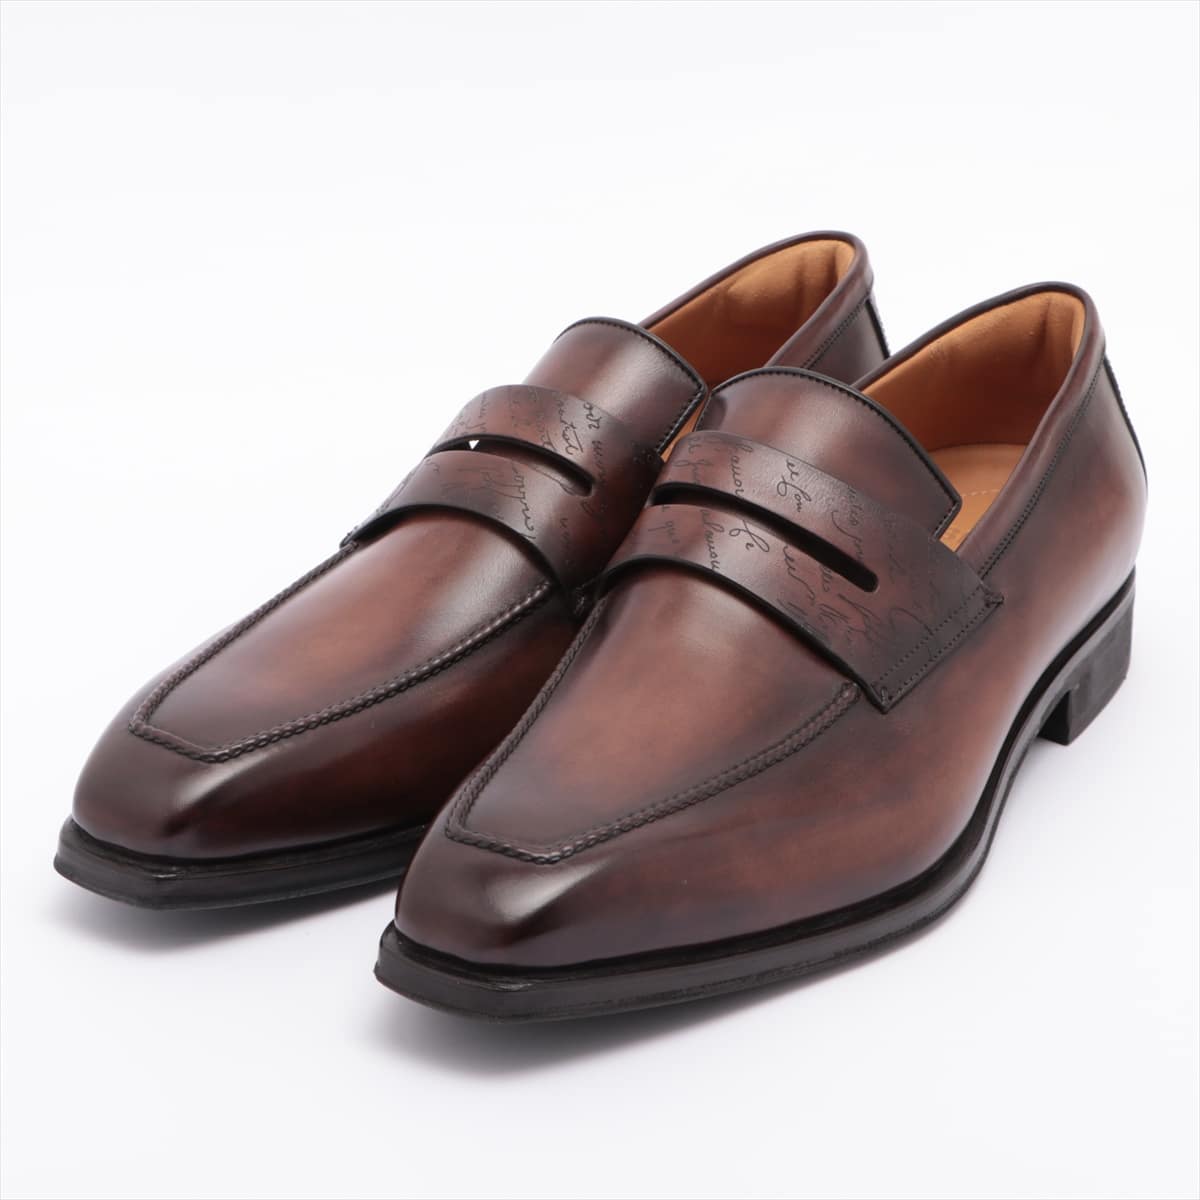 Berluti Andy Leather Loafer 10 Men's Brown Calligraphy